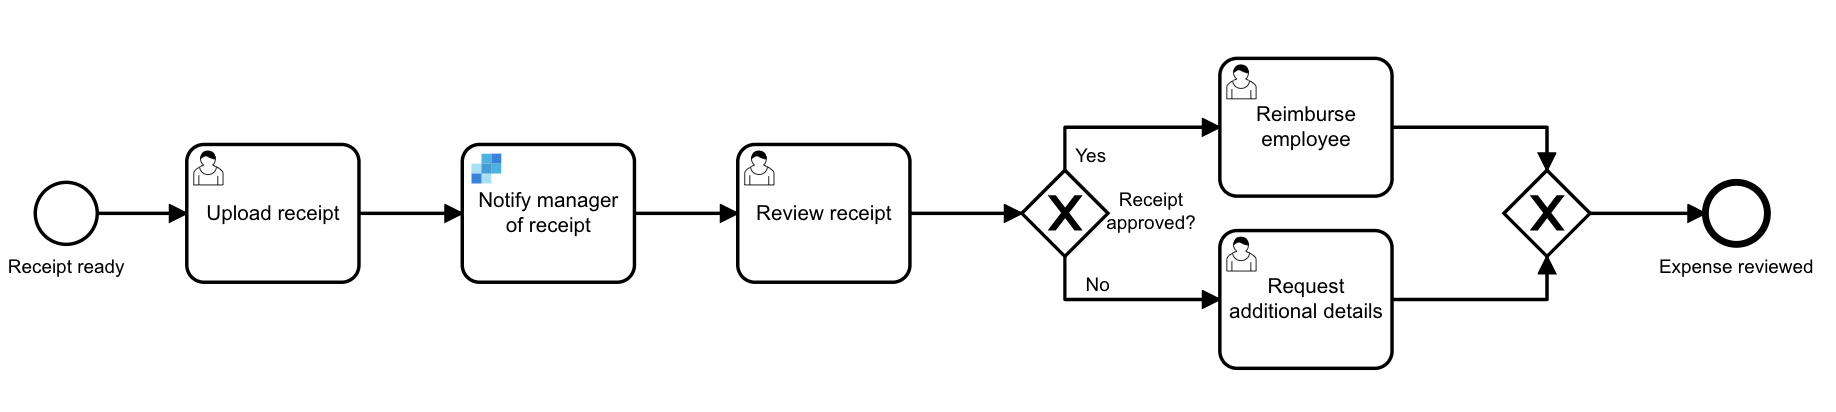 completed connectors and BPMN diagram